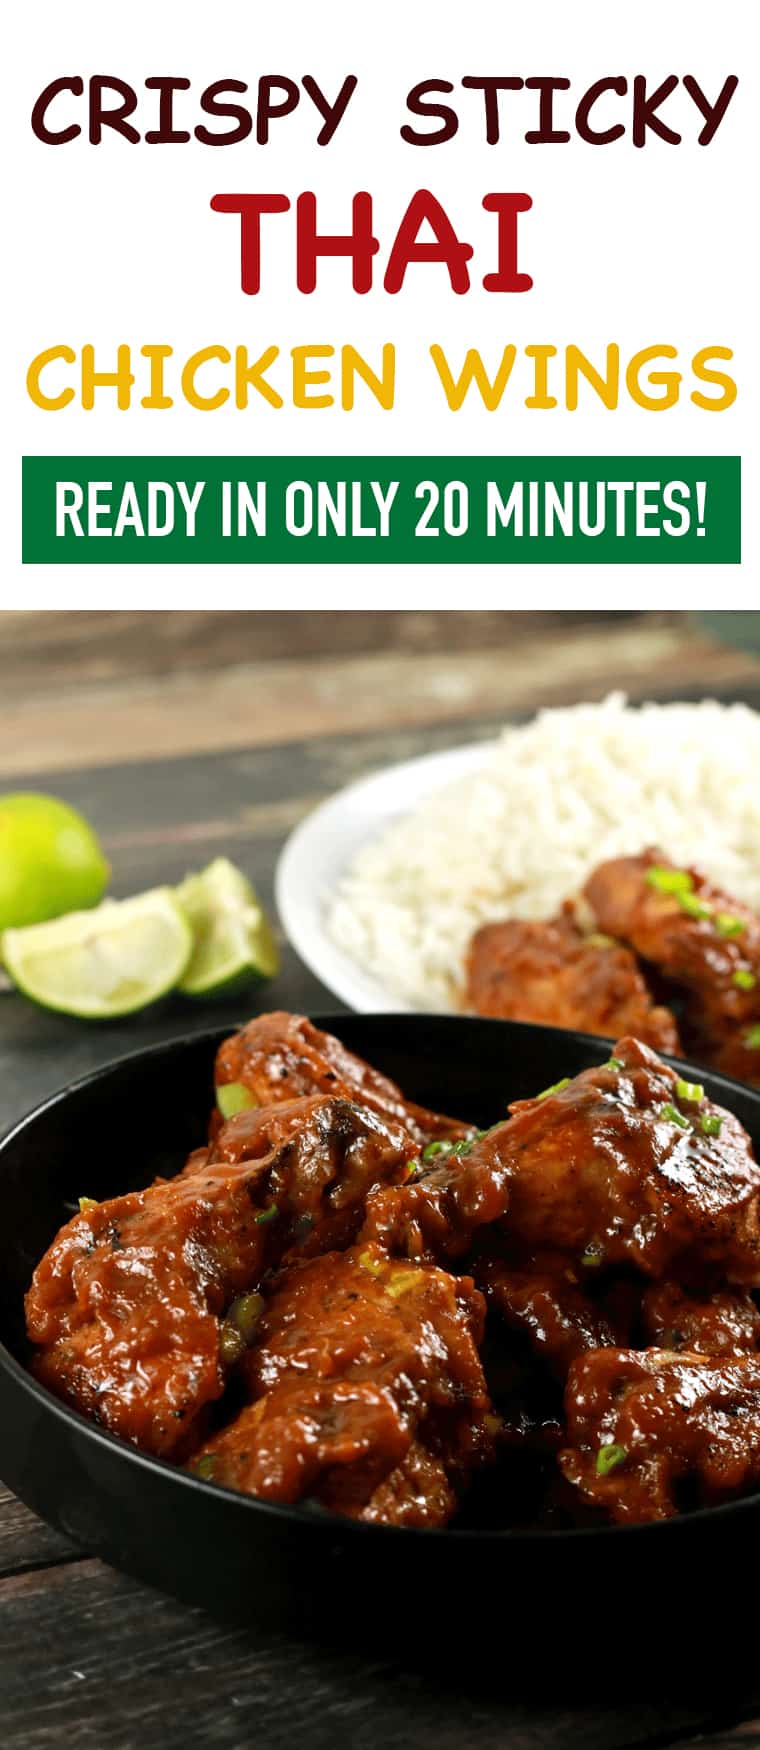 Crispy Sticky Thai Chicken Wings - These Thai chicken wings have a crispy outside coated with this spicy and delicious sticky sauce! It's so delicious that you'll be left licking your fingers in the end!! We absolutely LOVE it!| ScrambledChefs.com